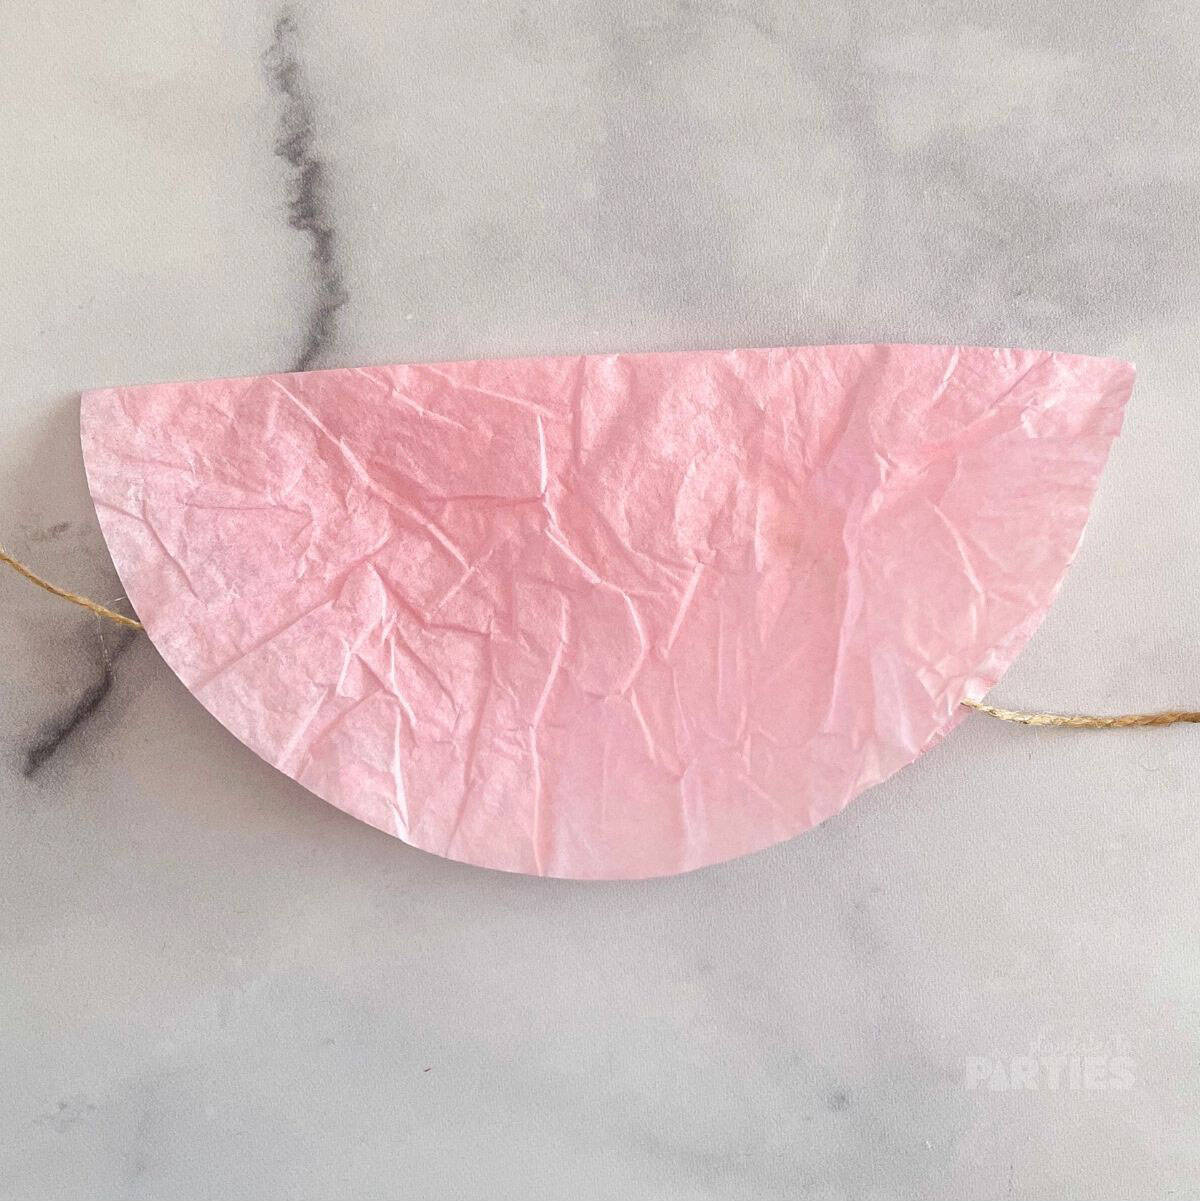 A pink coffee filter folded in half.